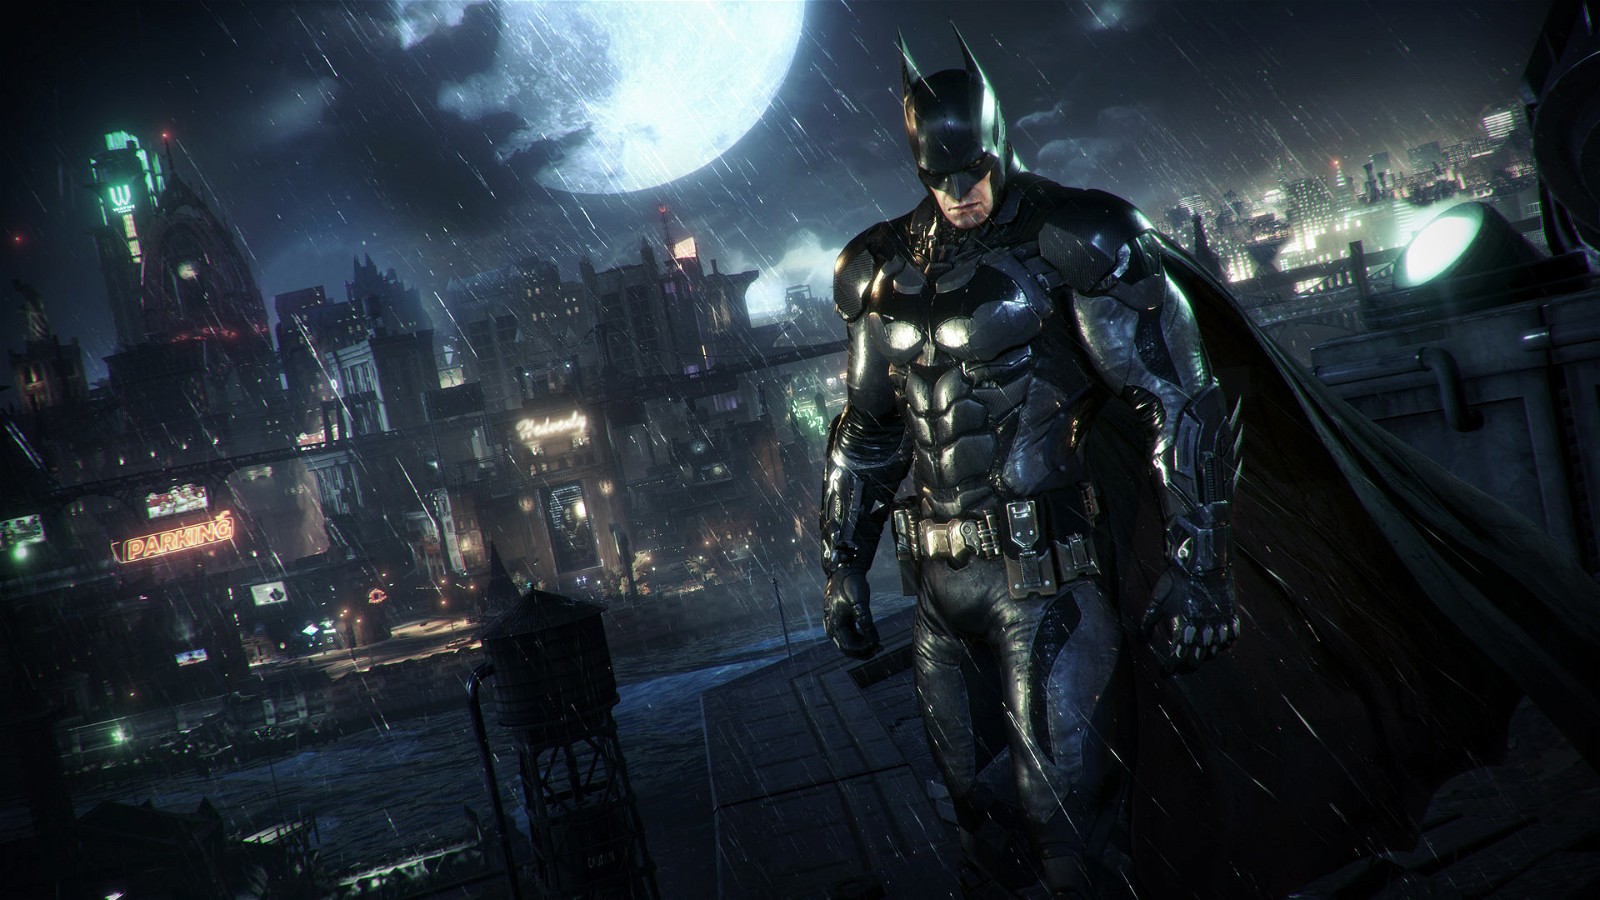 Batman: Arkham Knight's Batmobile and Iron Man-like suit alienated some fans, who felt they lost the series' unique charm.